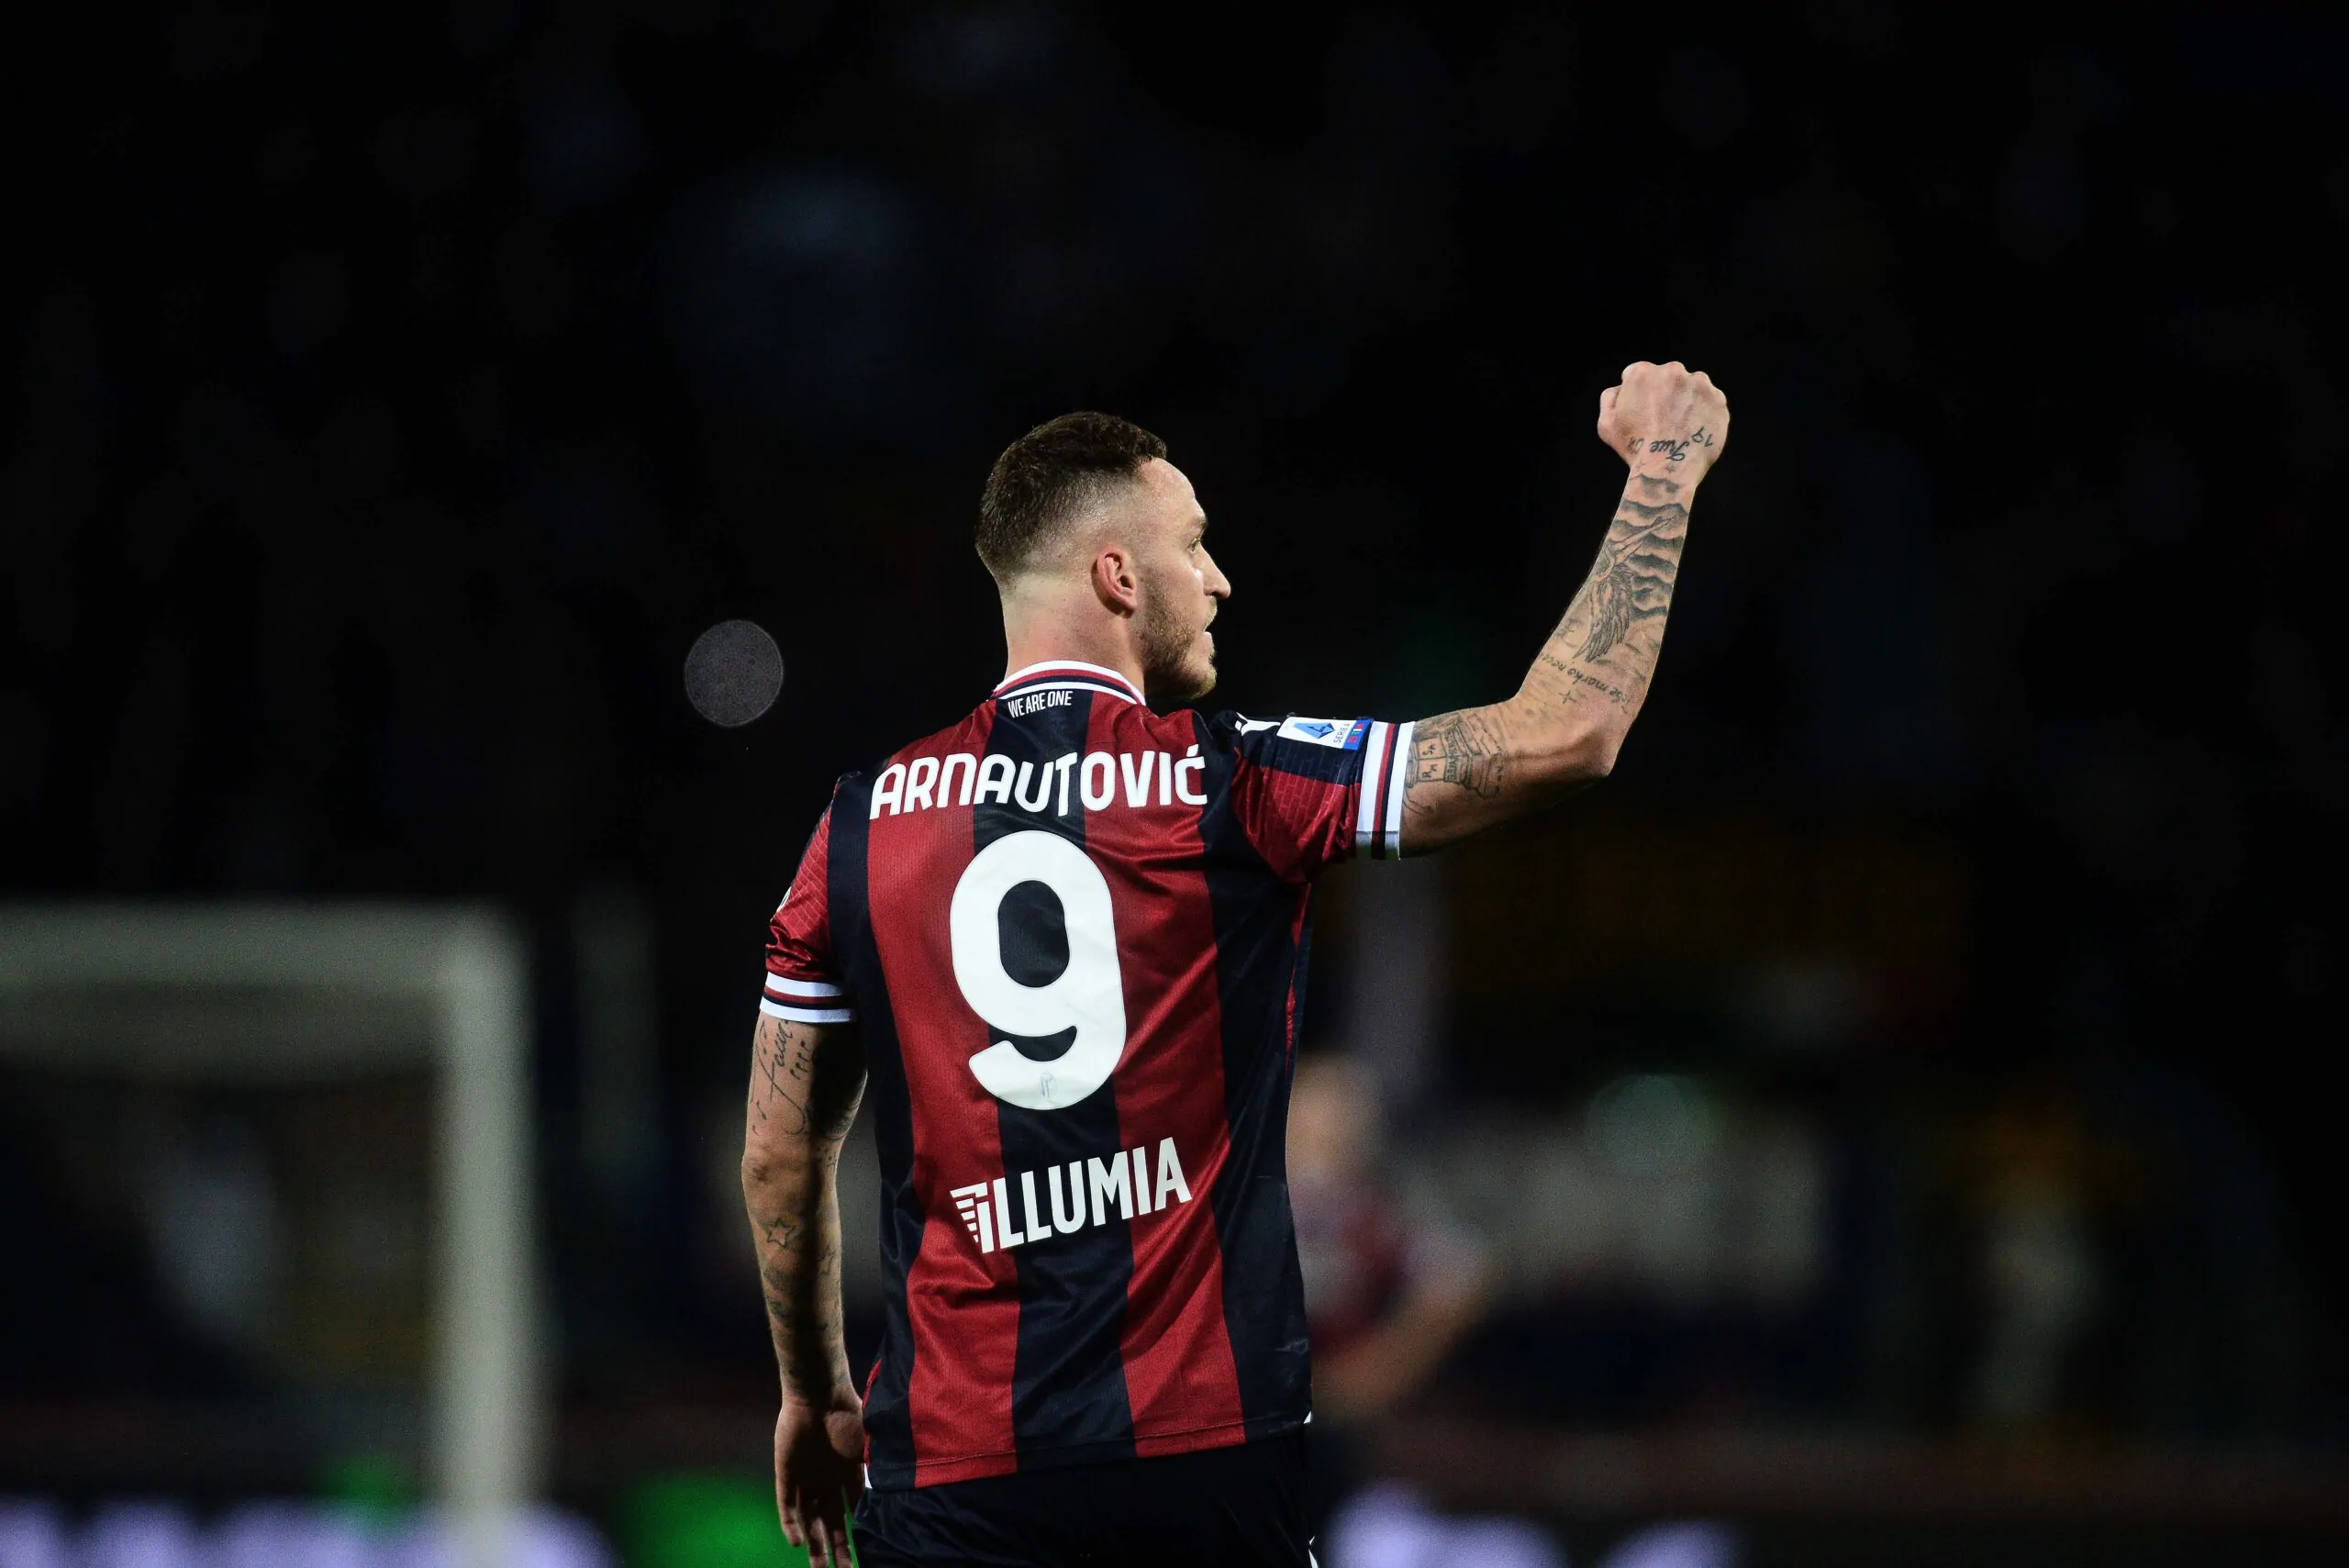 Massimiliano Allegri indicated Marko Arnautovic as an ideal deputy for Dusan Vlahovic, but Bologna do not want to sell him, to Juventus or any other side.